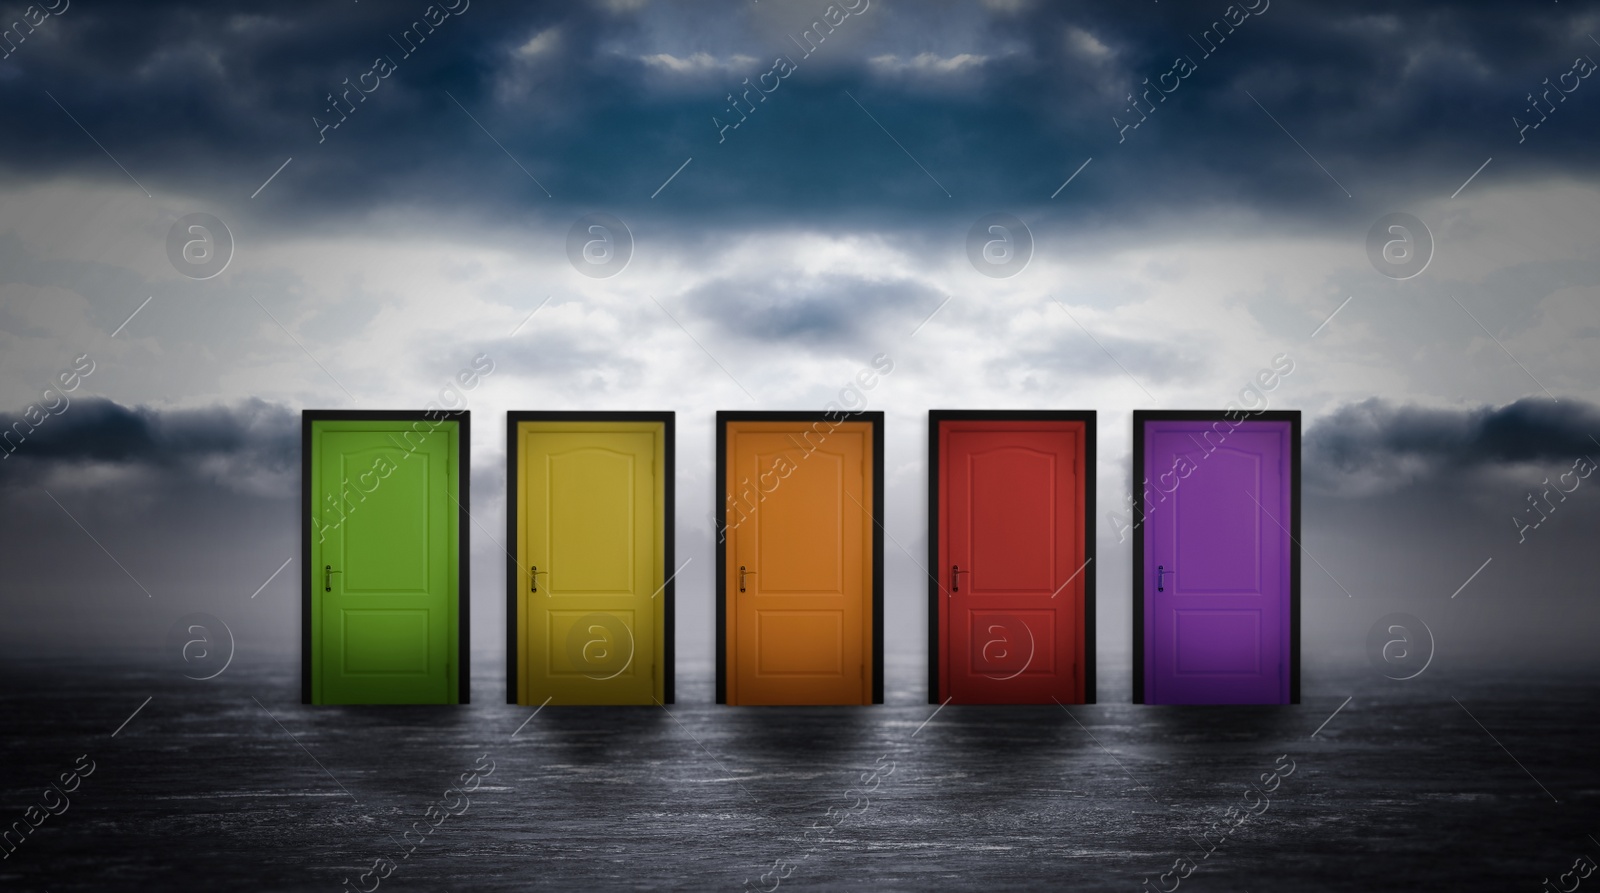 Image of Many colorful doors against sky with rainy clouds on background. Concept of choice 